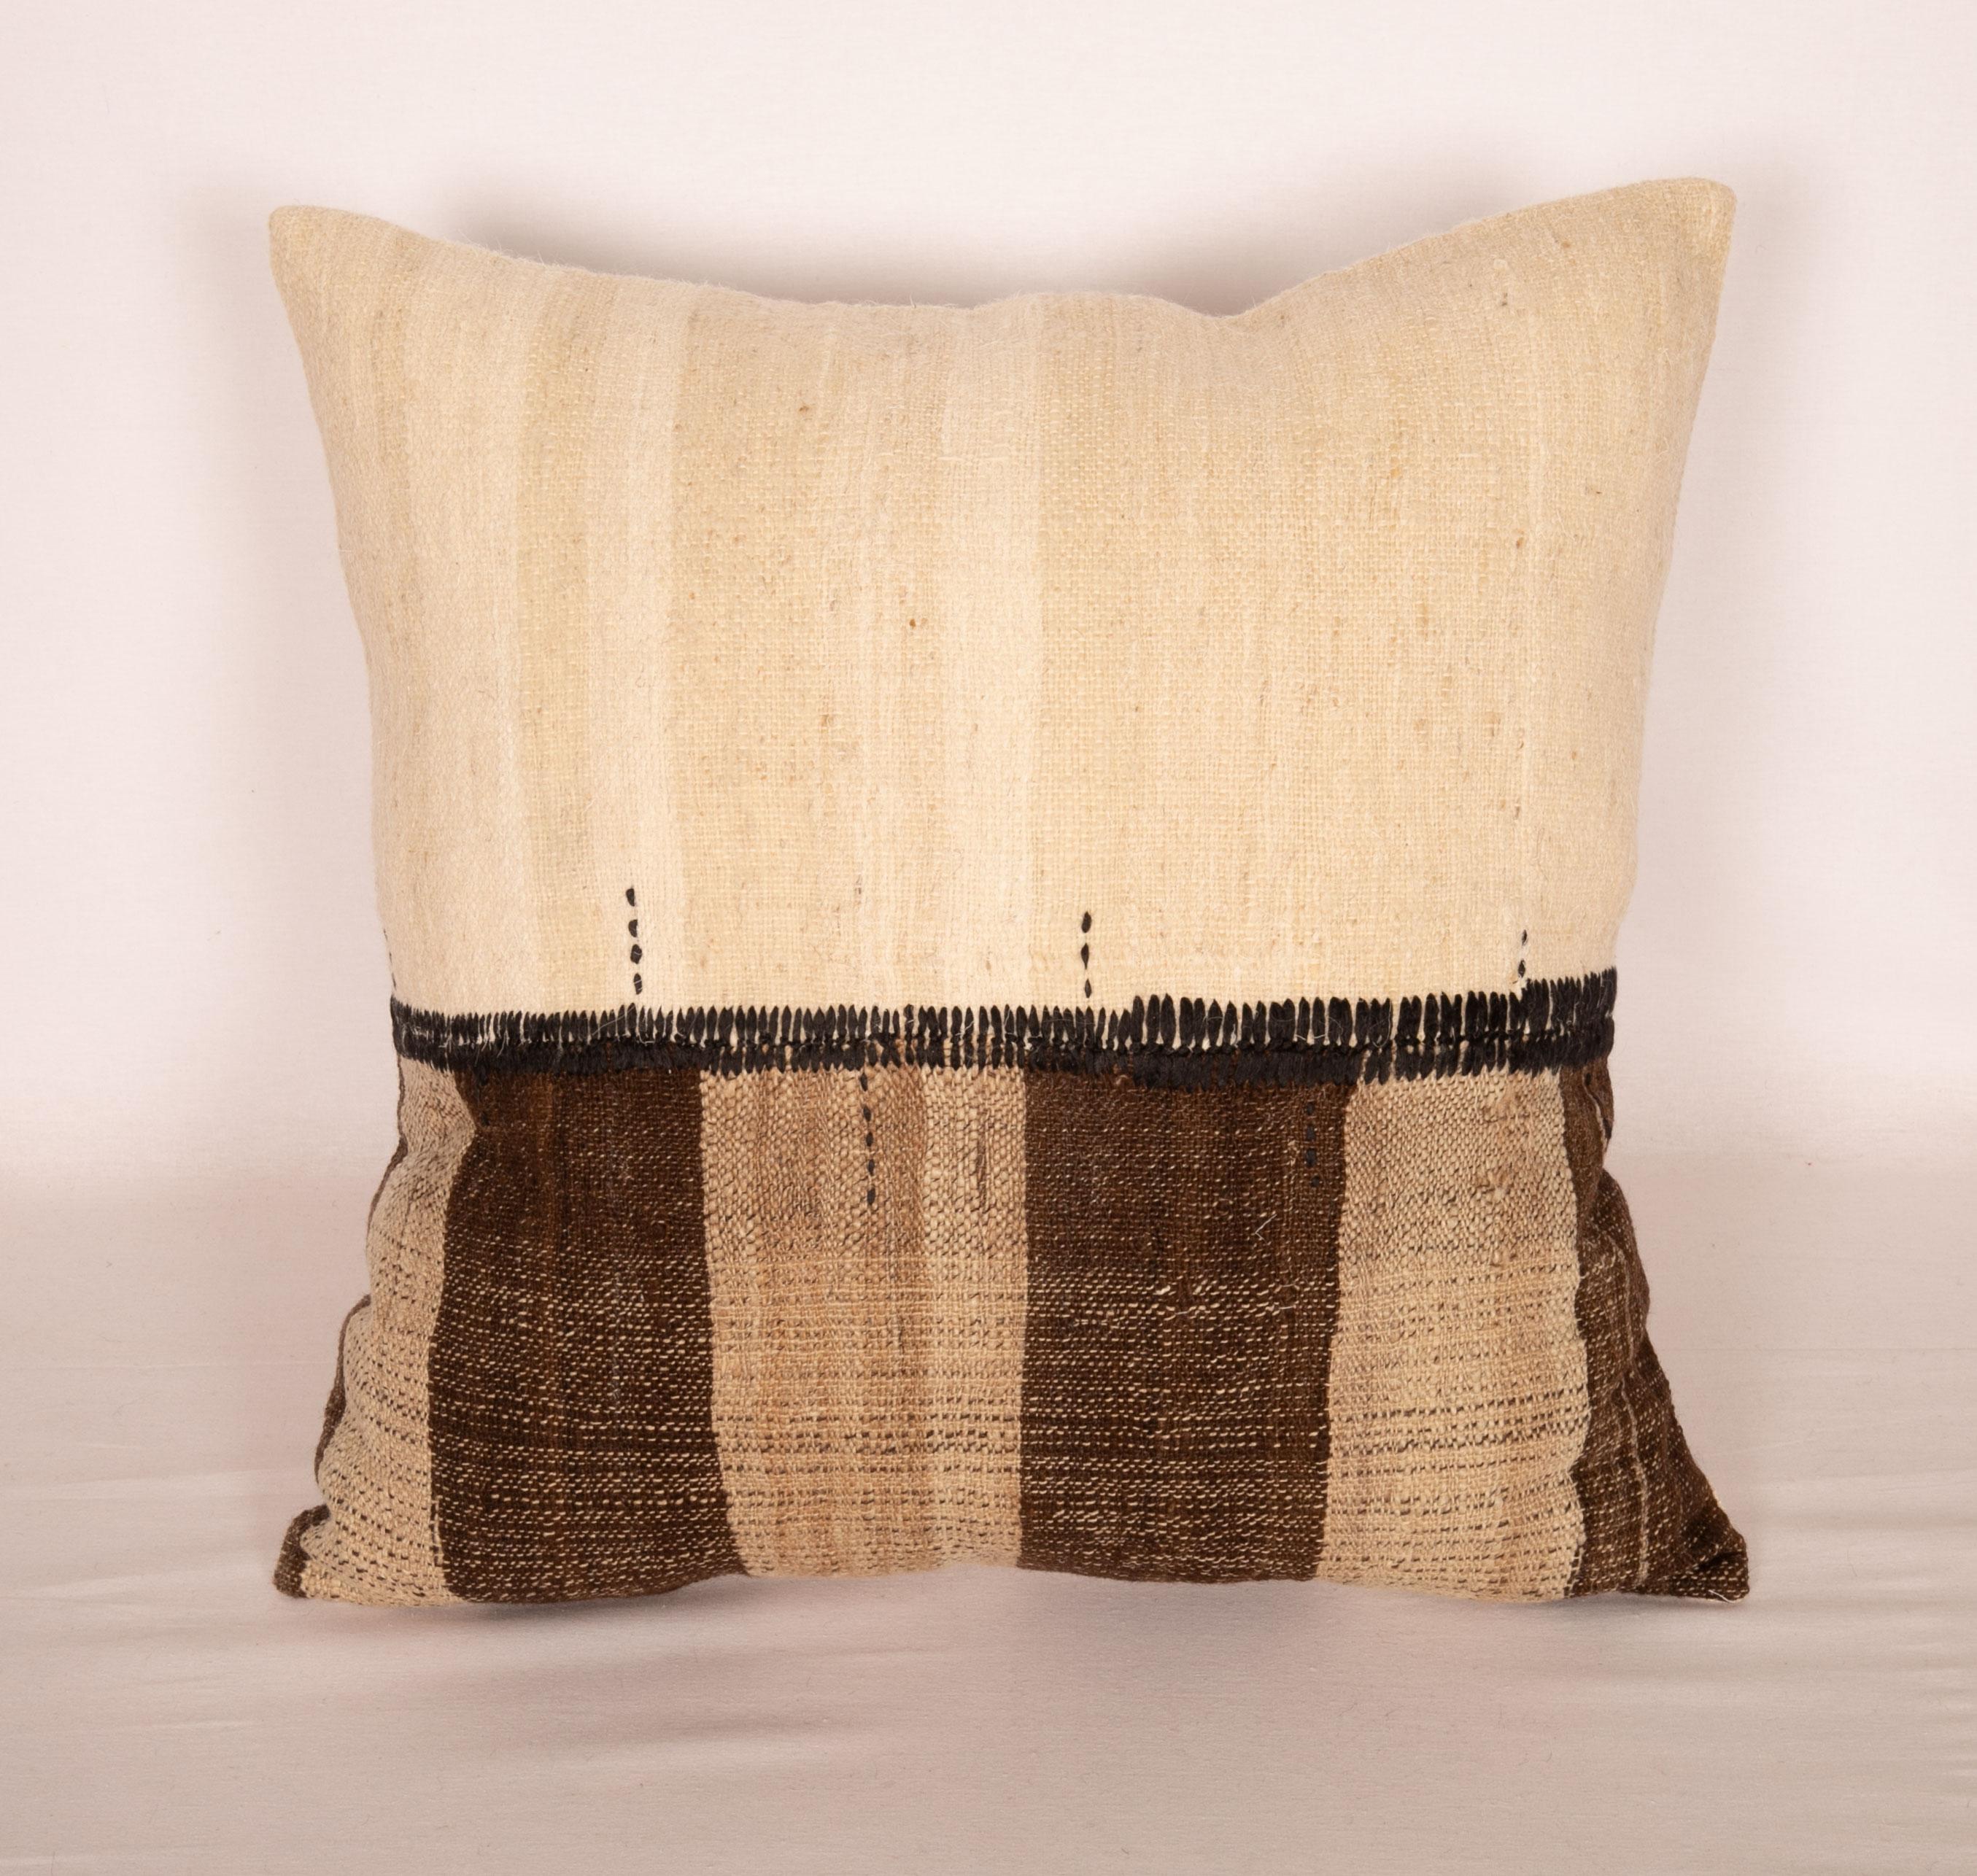 Kilim Neutral Pillowcases Made from an Anatolian Vintage Cover, Mid-20th Century